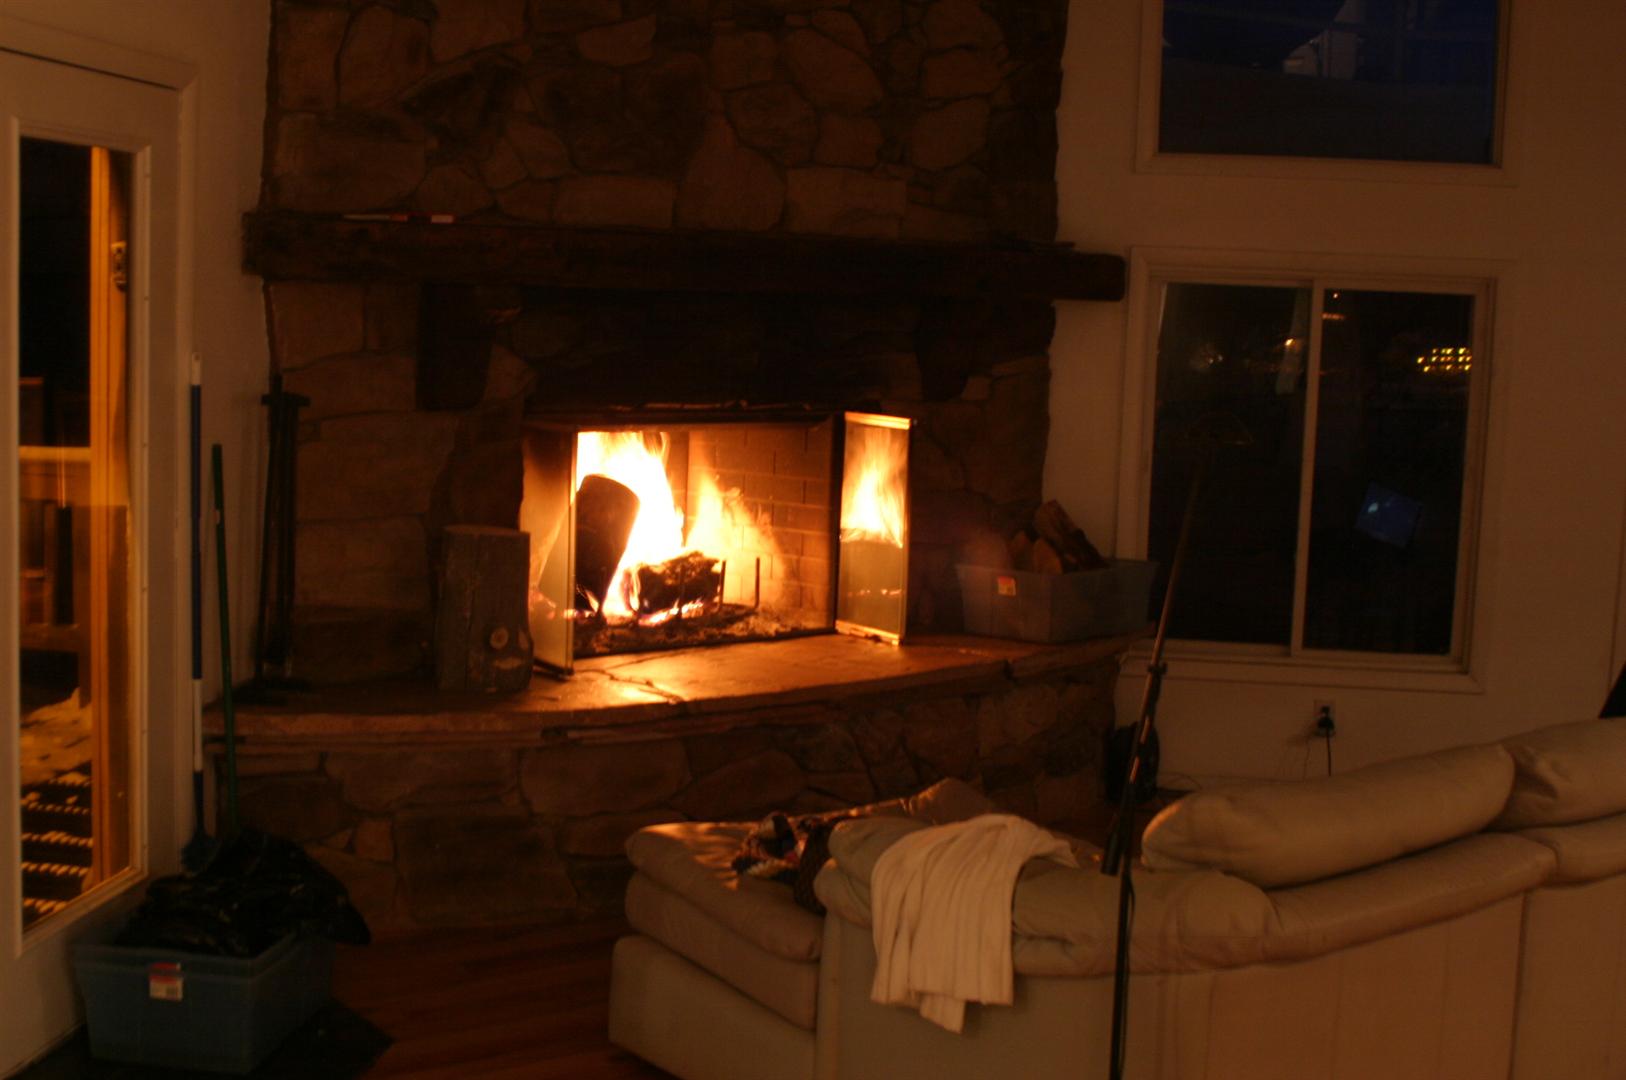 Wood burning fireplace in the living room